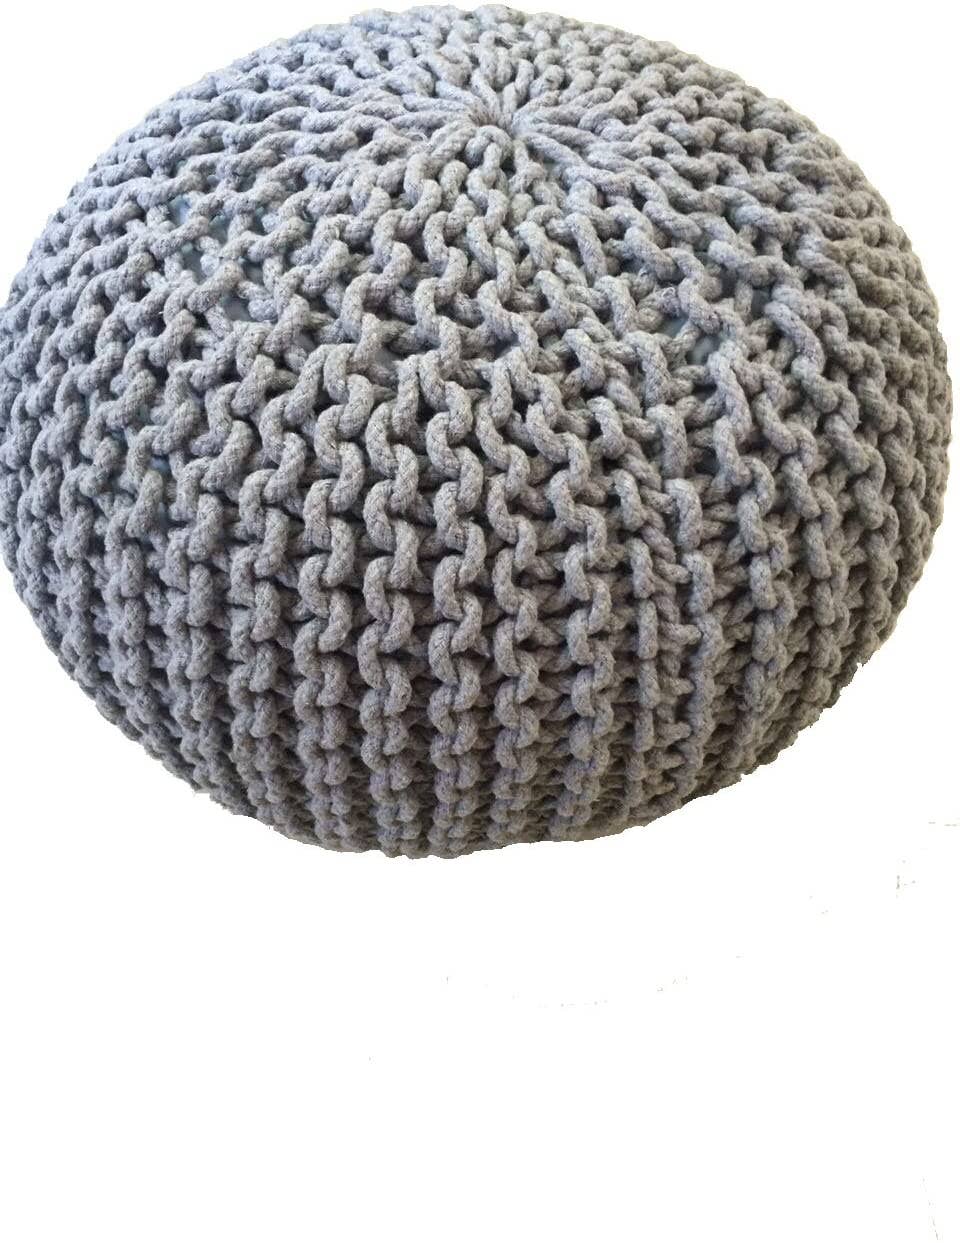 Knitted Round Pouf Foot Stool Ottoman Home Decor - Cabinet Sales Center